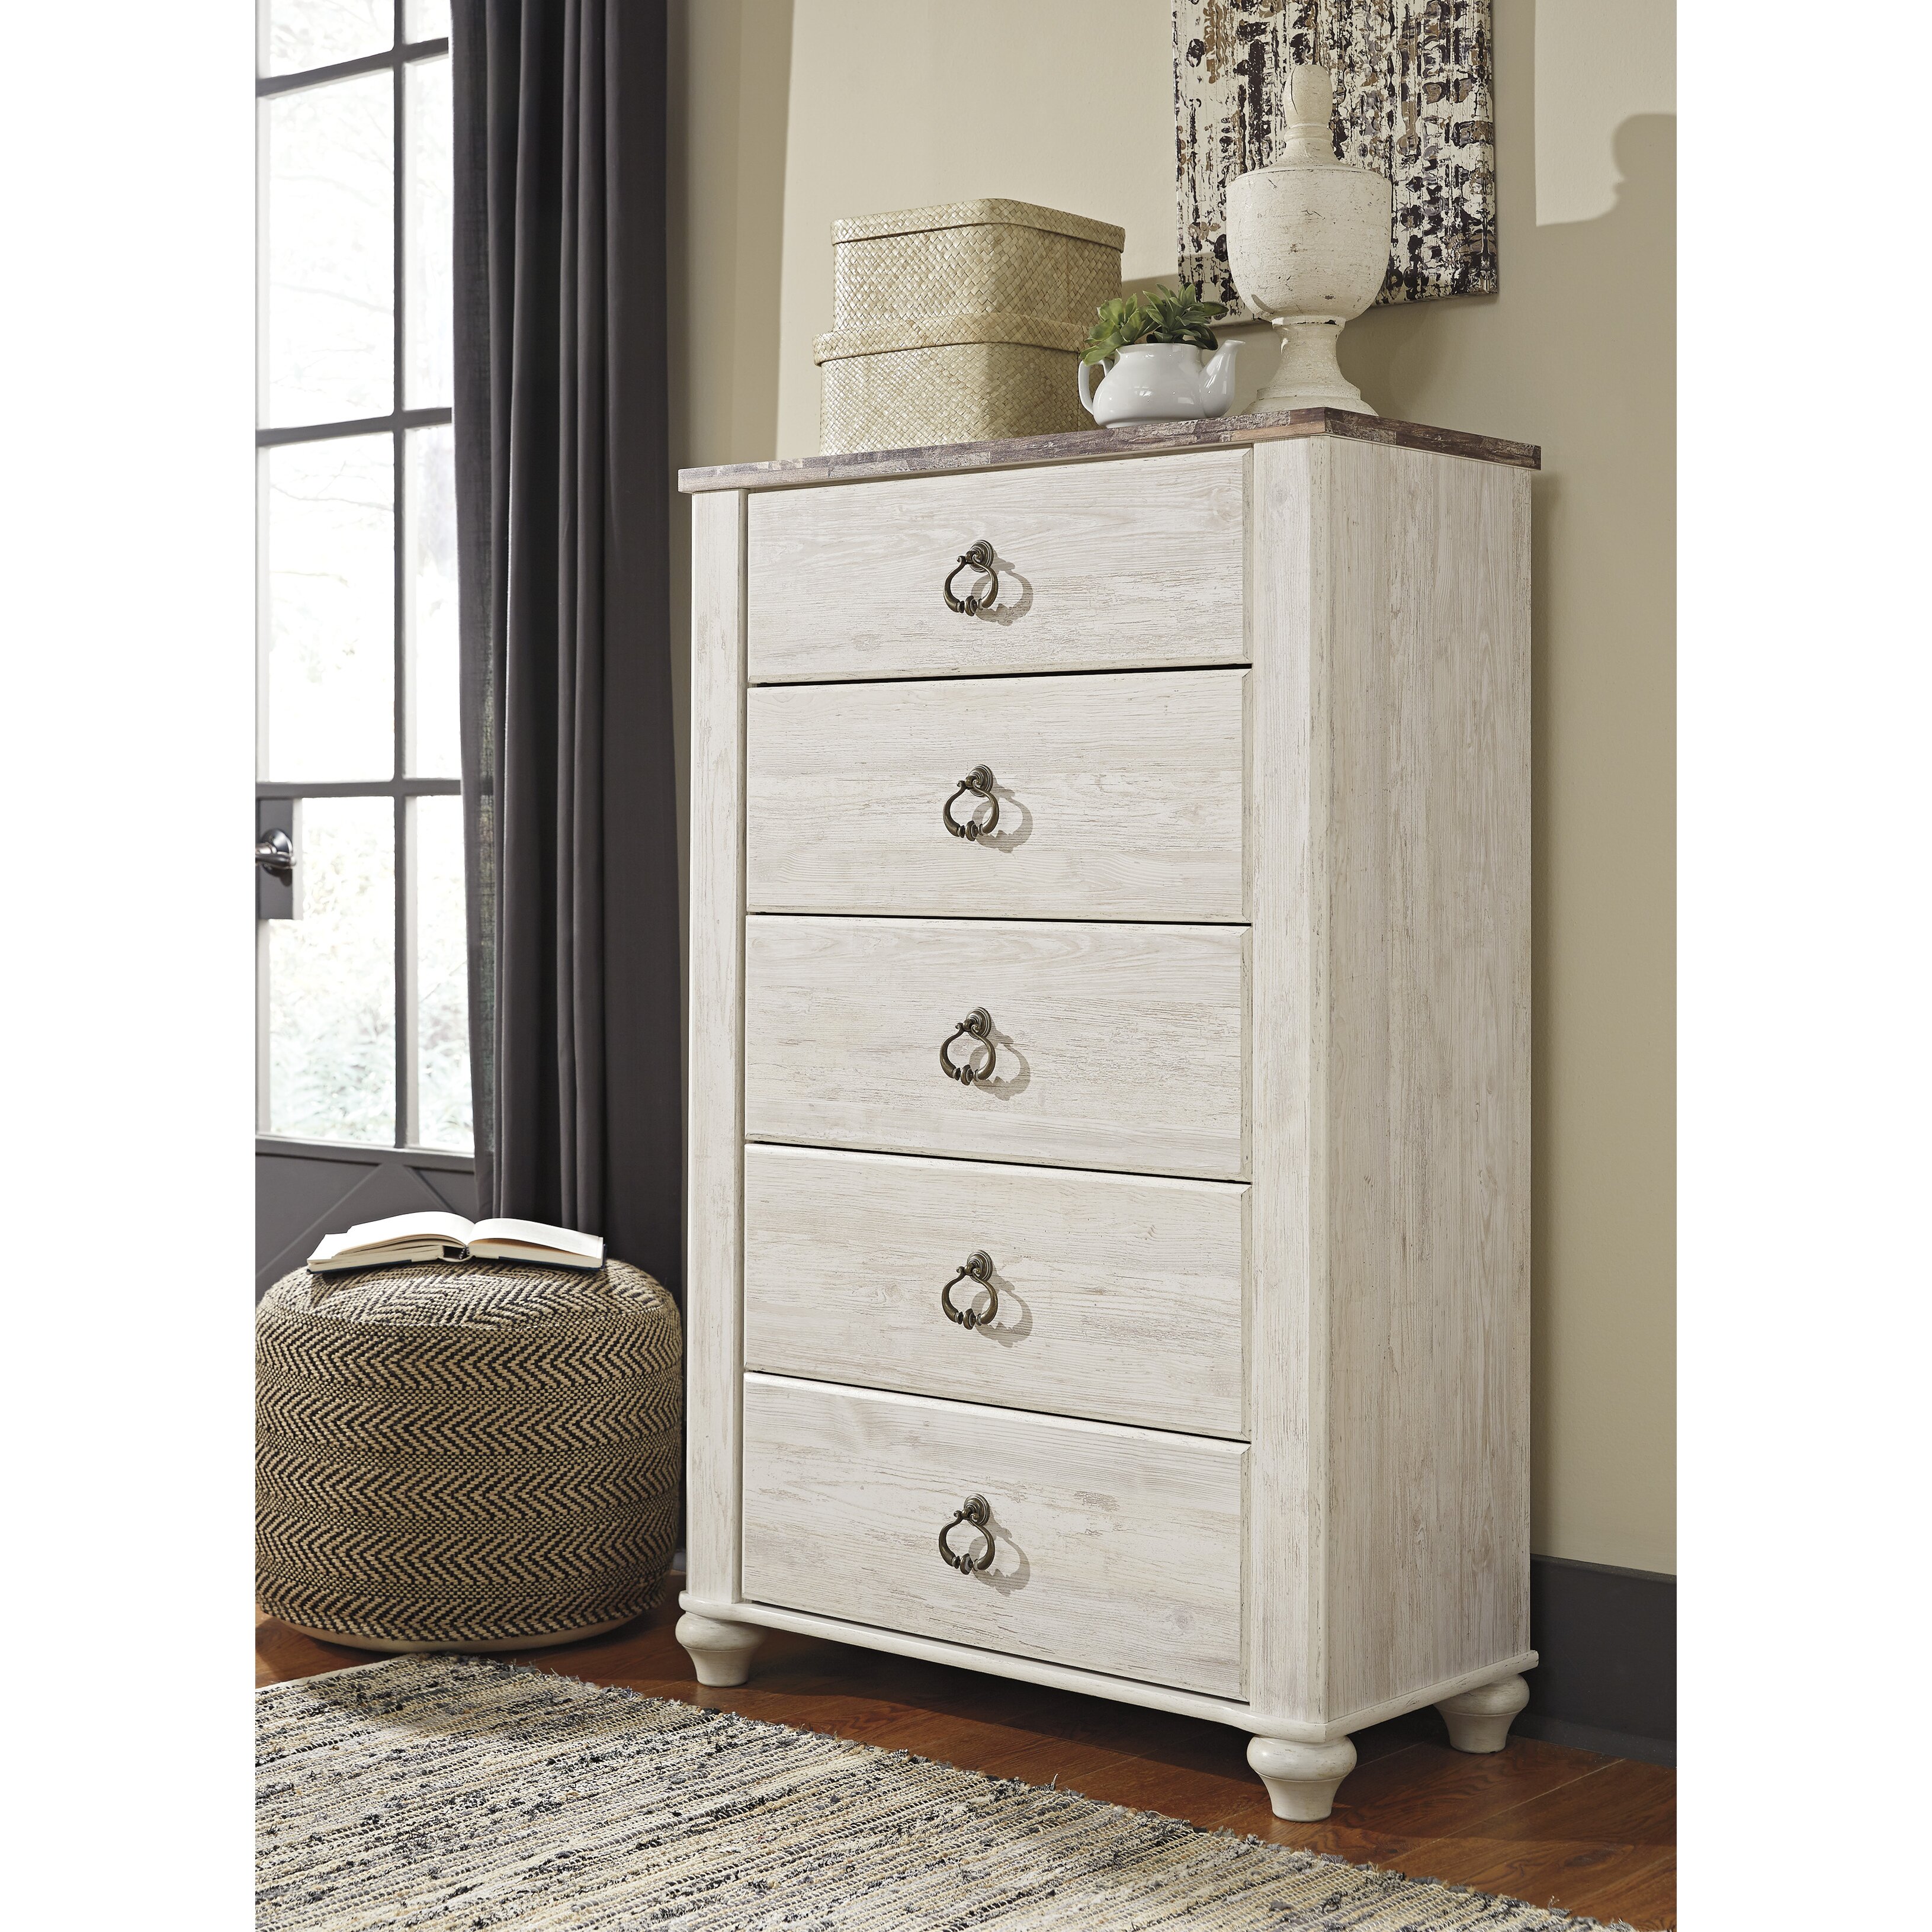 Signature Design by Ashley Willowton 5 Drawer Media Chest & Reviews